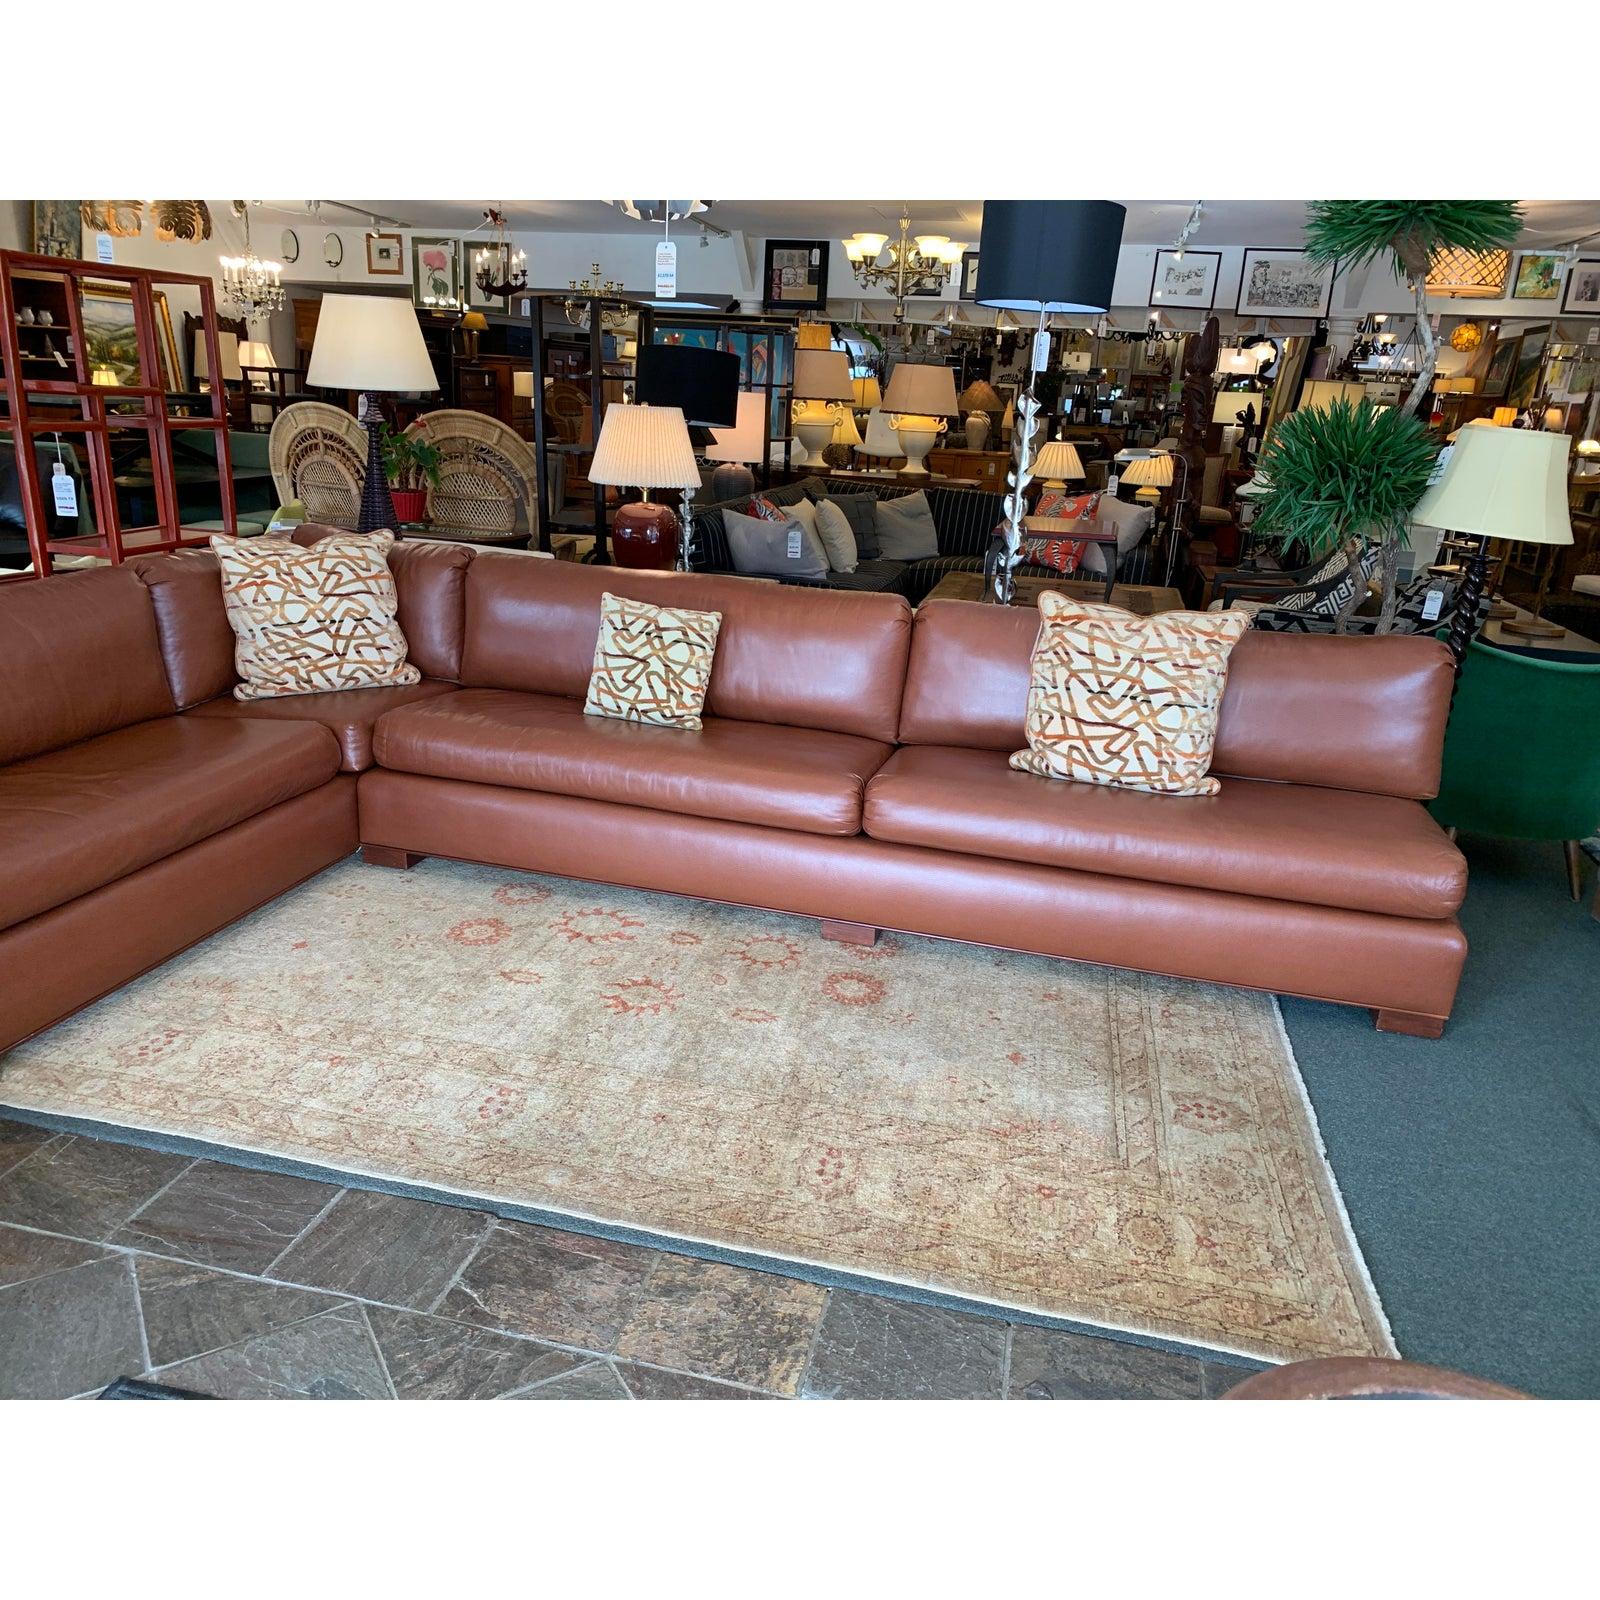 Presents a custom Large two-piece sectional seat. Soft synthetic fill with high density foam give soft yet firm support for hours of lounging. Easy to maintain vinyl has shagreen like texture in richly warm cognac tone. Composed of two large pieces